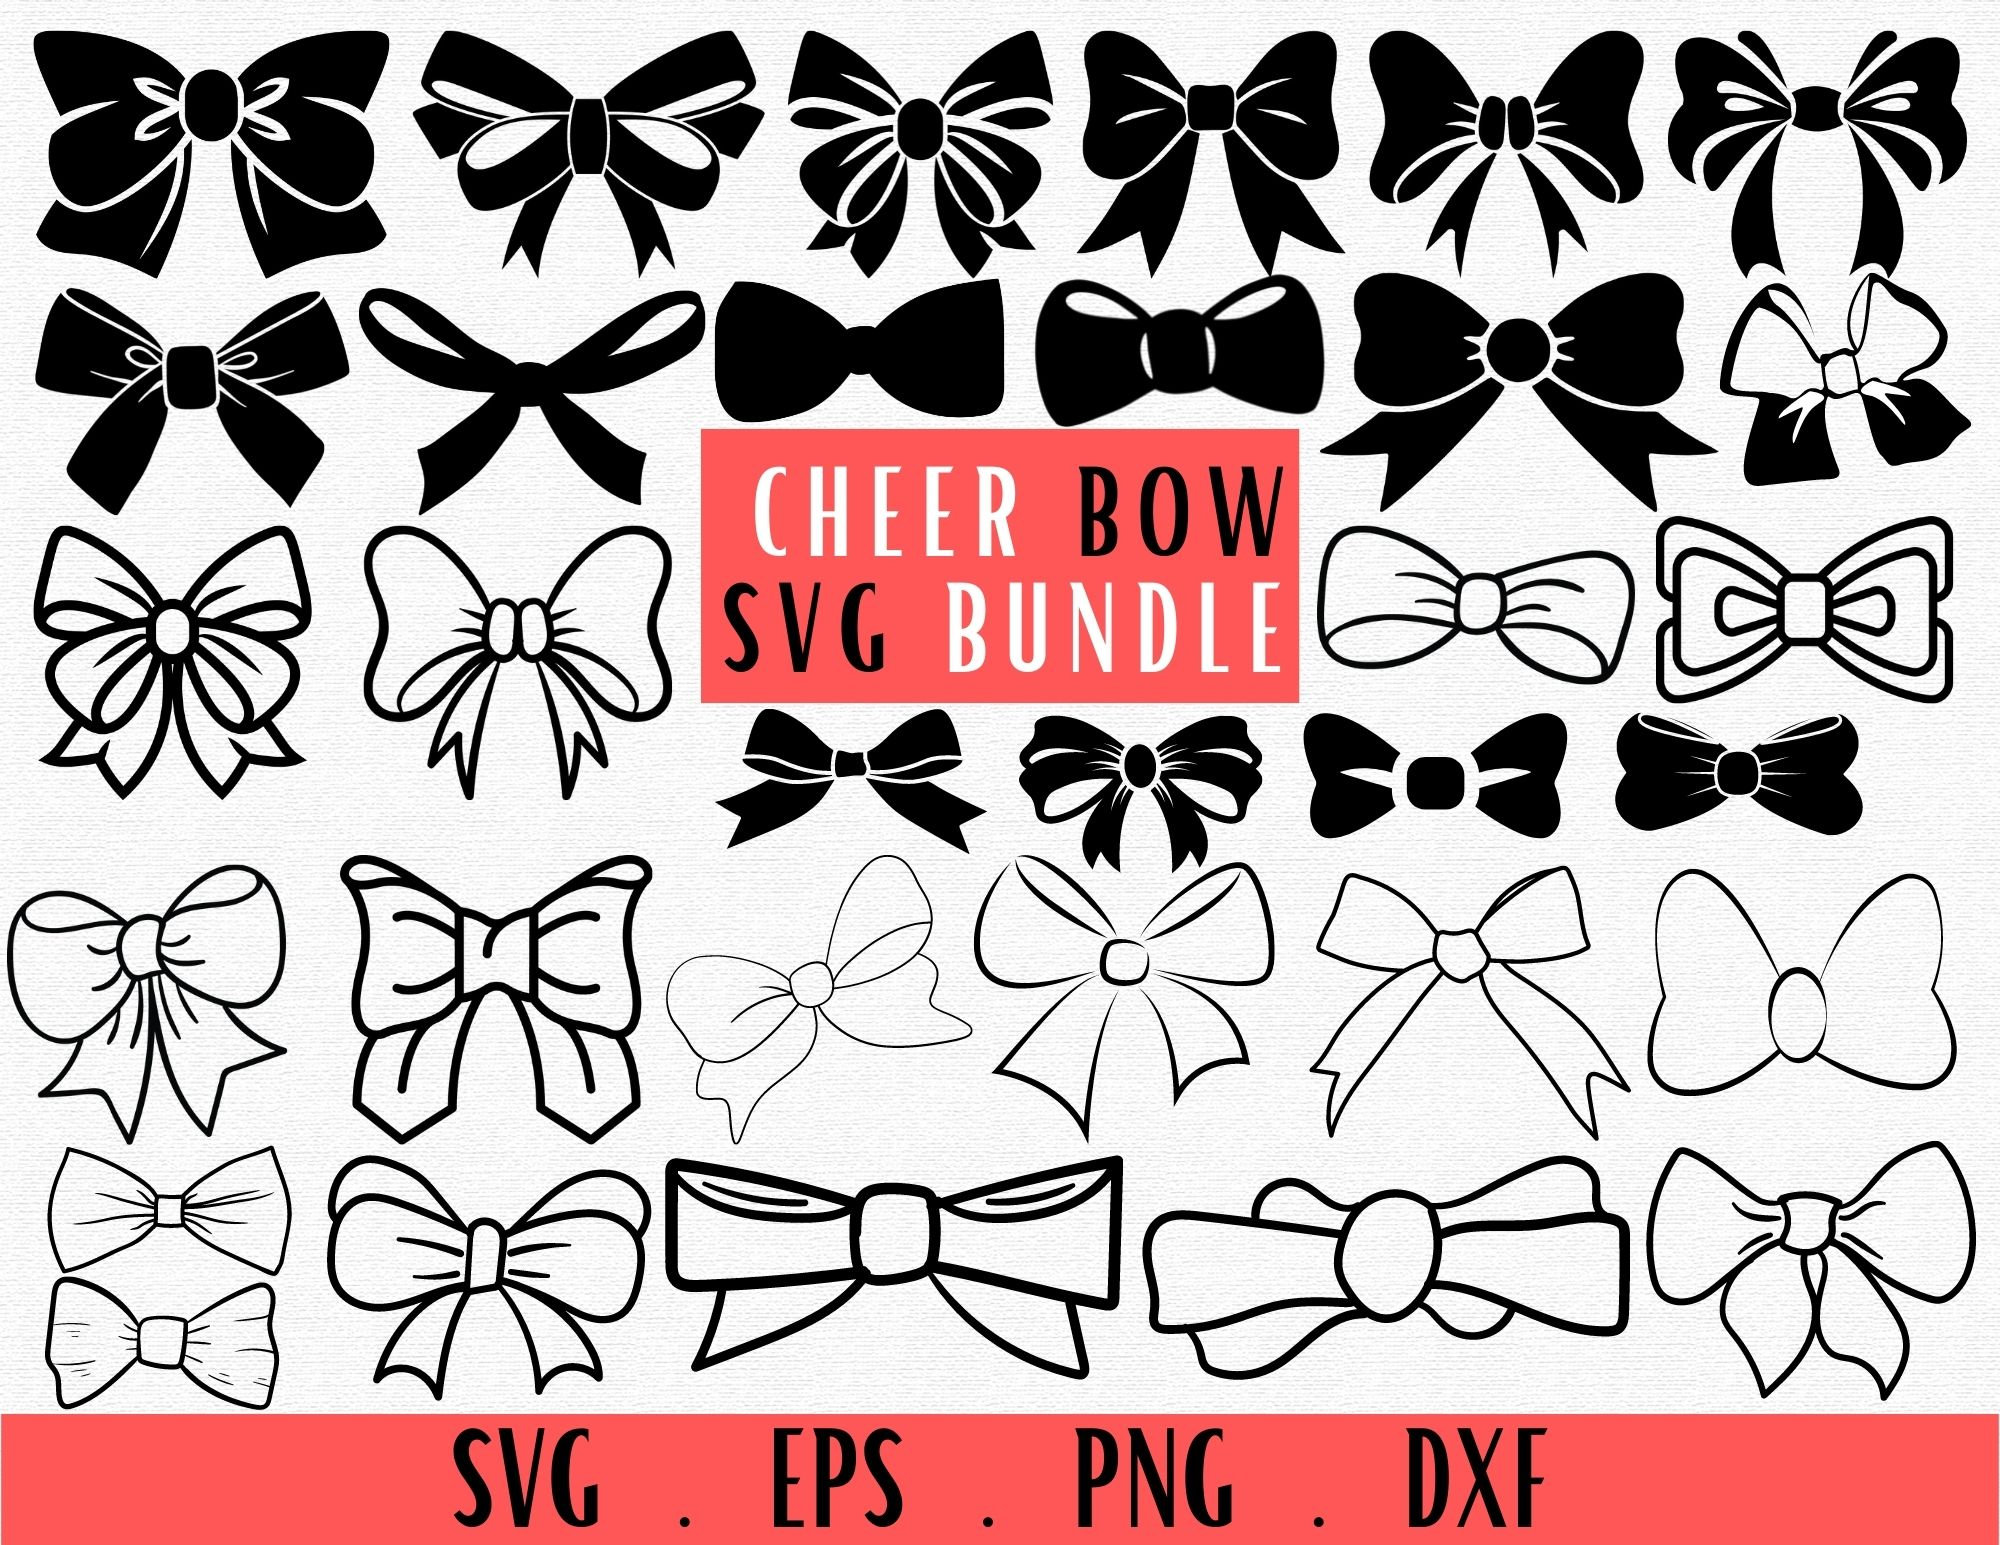 Watercolor Red Bows Clipart Handpainted Gift Bows PNG Digital Scrapbooking  Printable Holiday Planner Stickers DIY Elements Commercial Use 